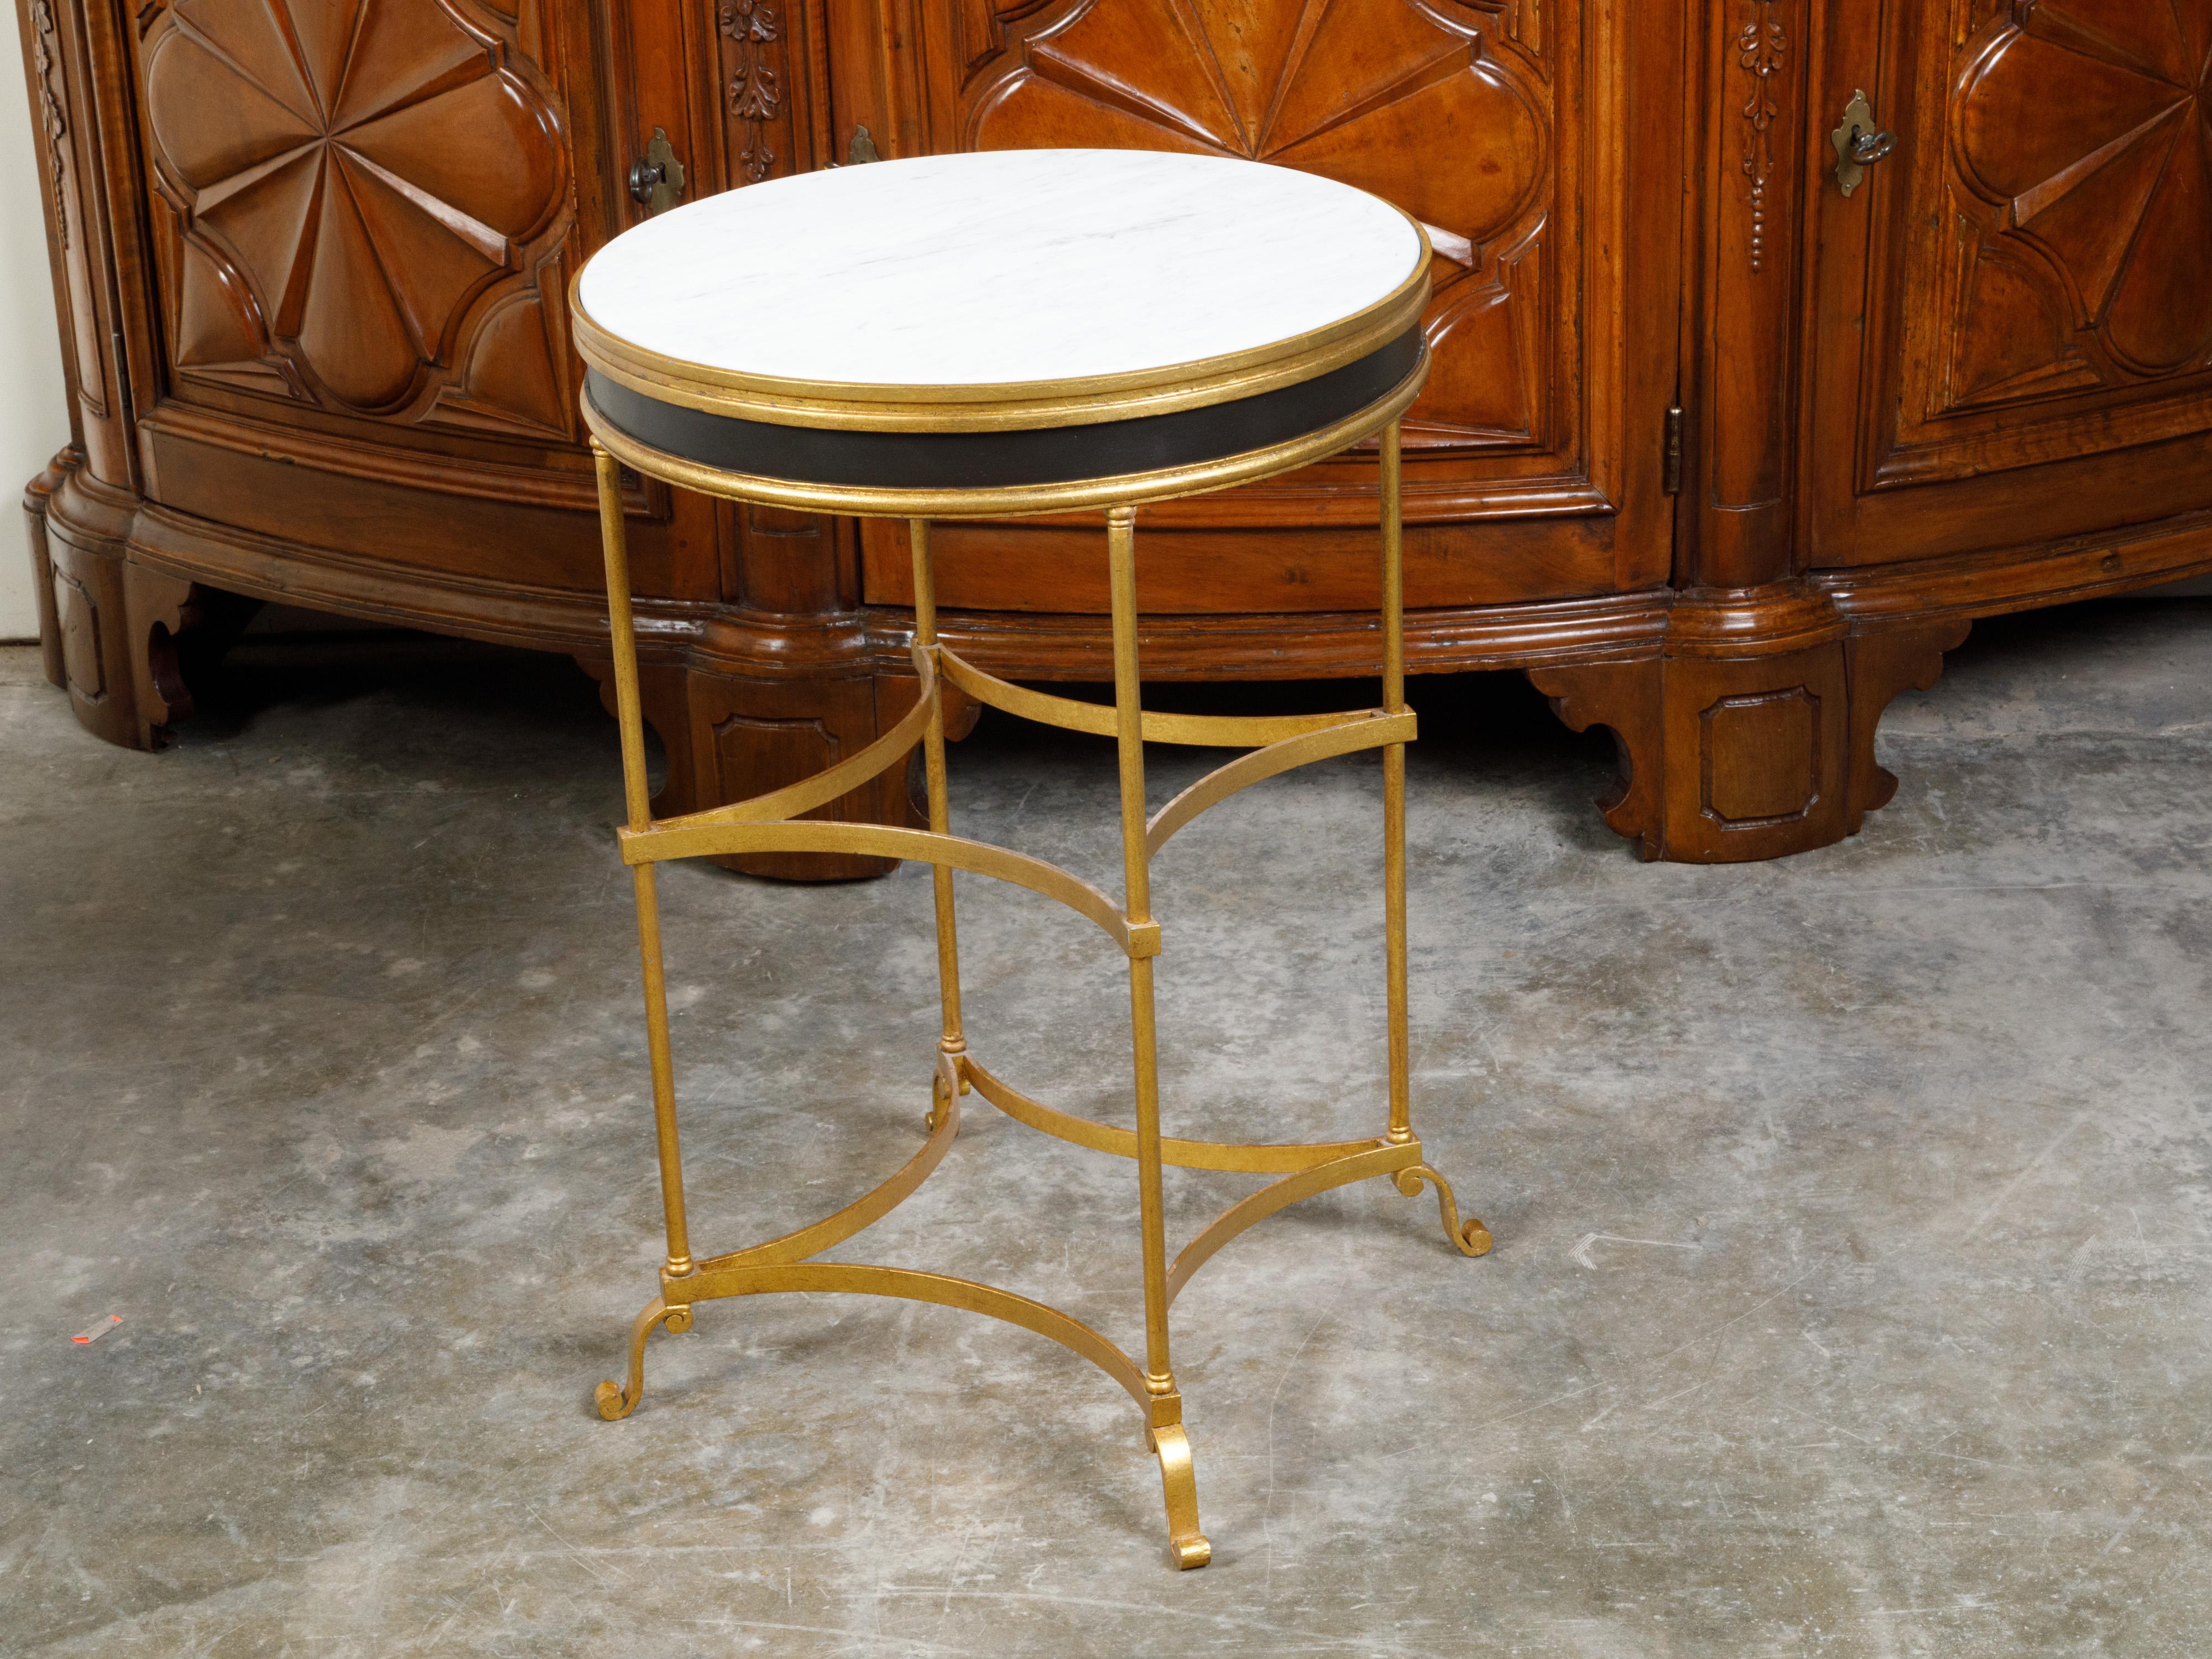 Italian Midcentury Gilt Metal Table with Marble Top and In-Curving Stretchers For Sale 3